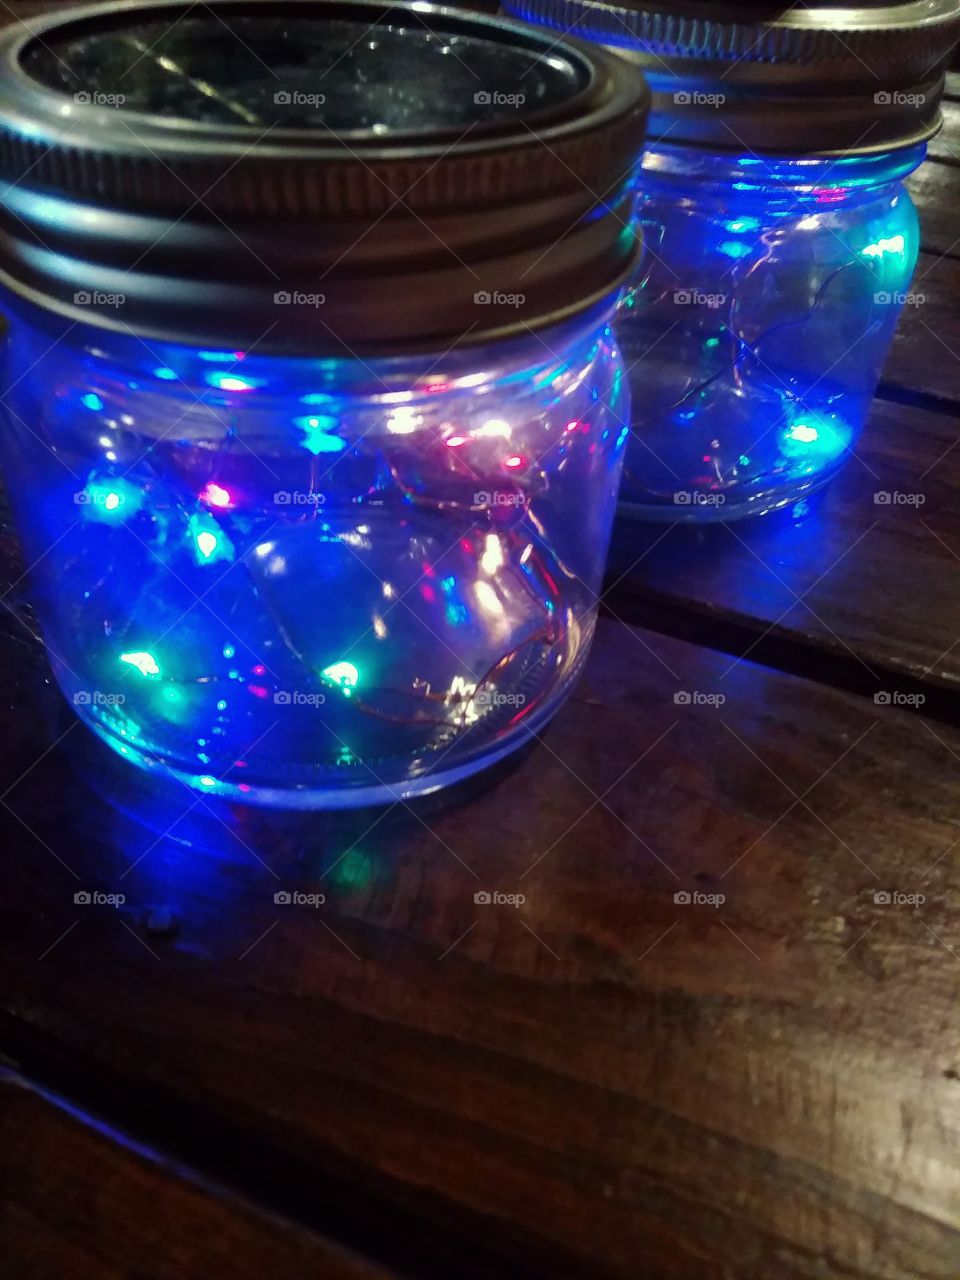 Painting with light. Lights in Jars. Romantic set-up.